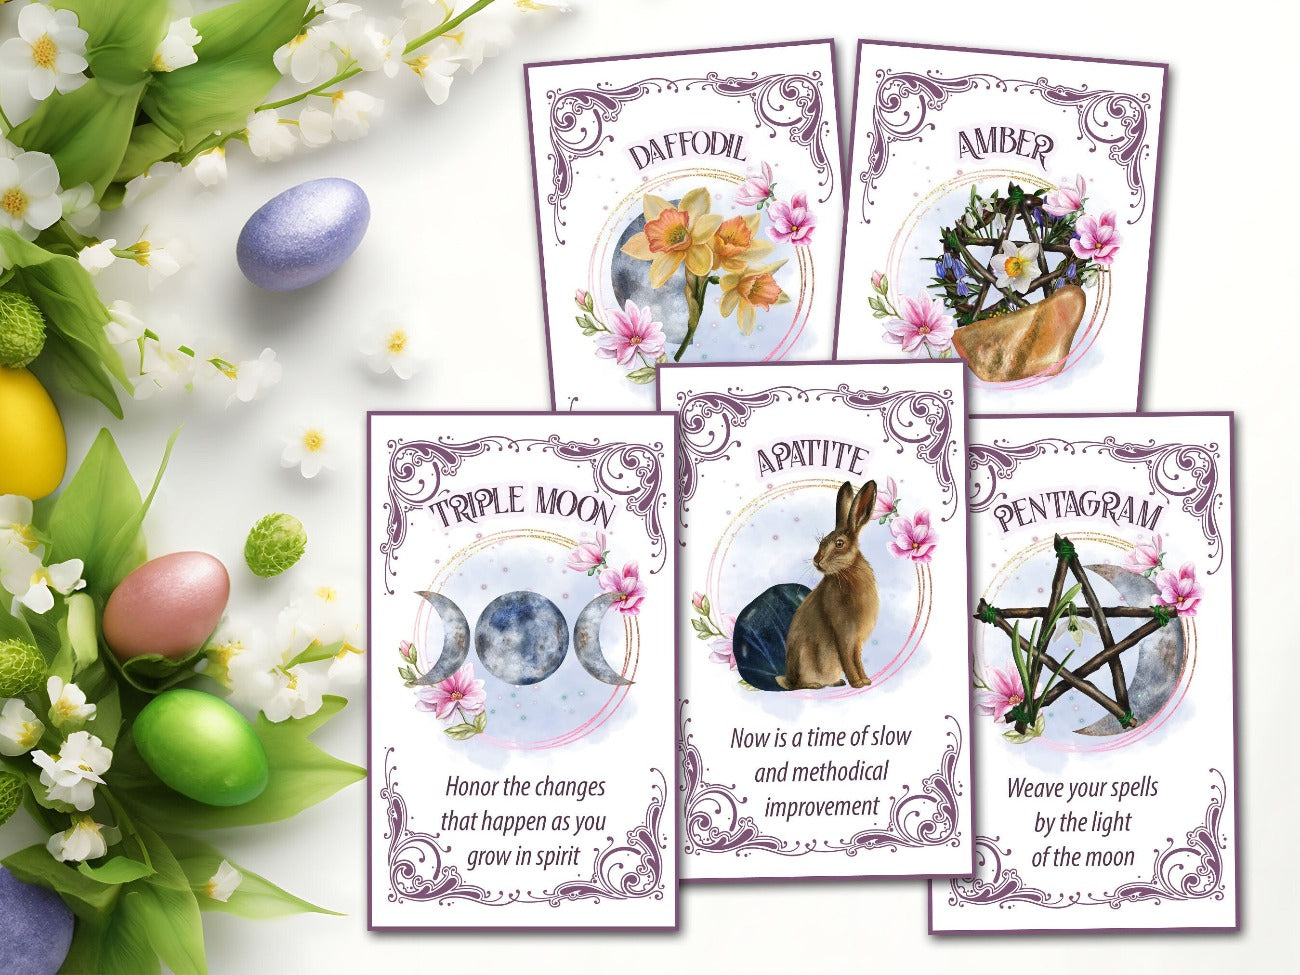 OSTARA ORACLE CARDS, Printable Tarot Messages, Daffodil, Amber, Triple Moon, Apatite, and Pentagram cards - Morgana Magick Spell